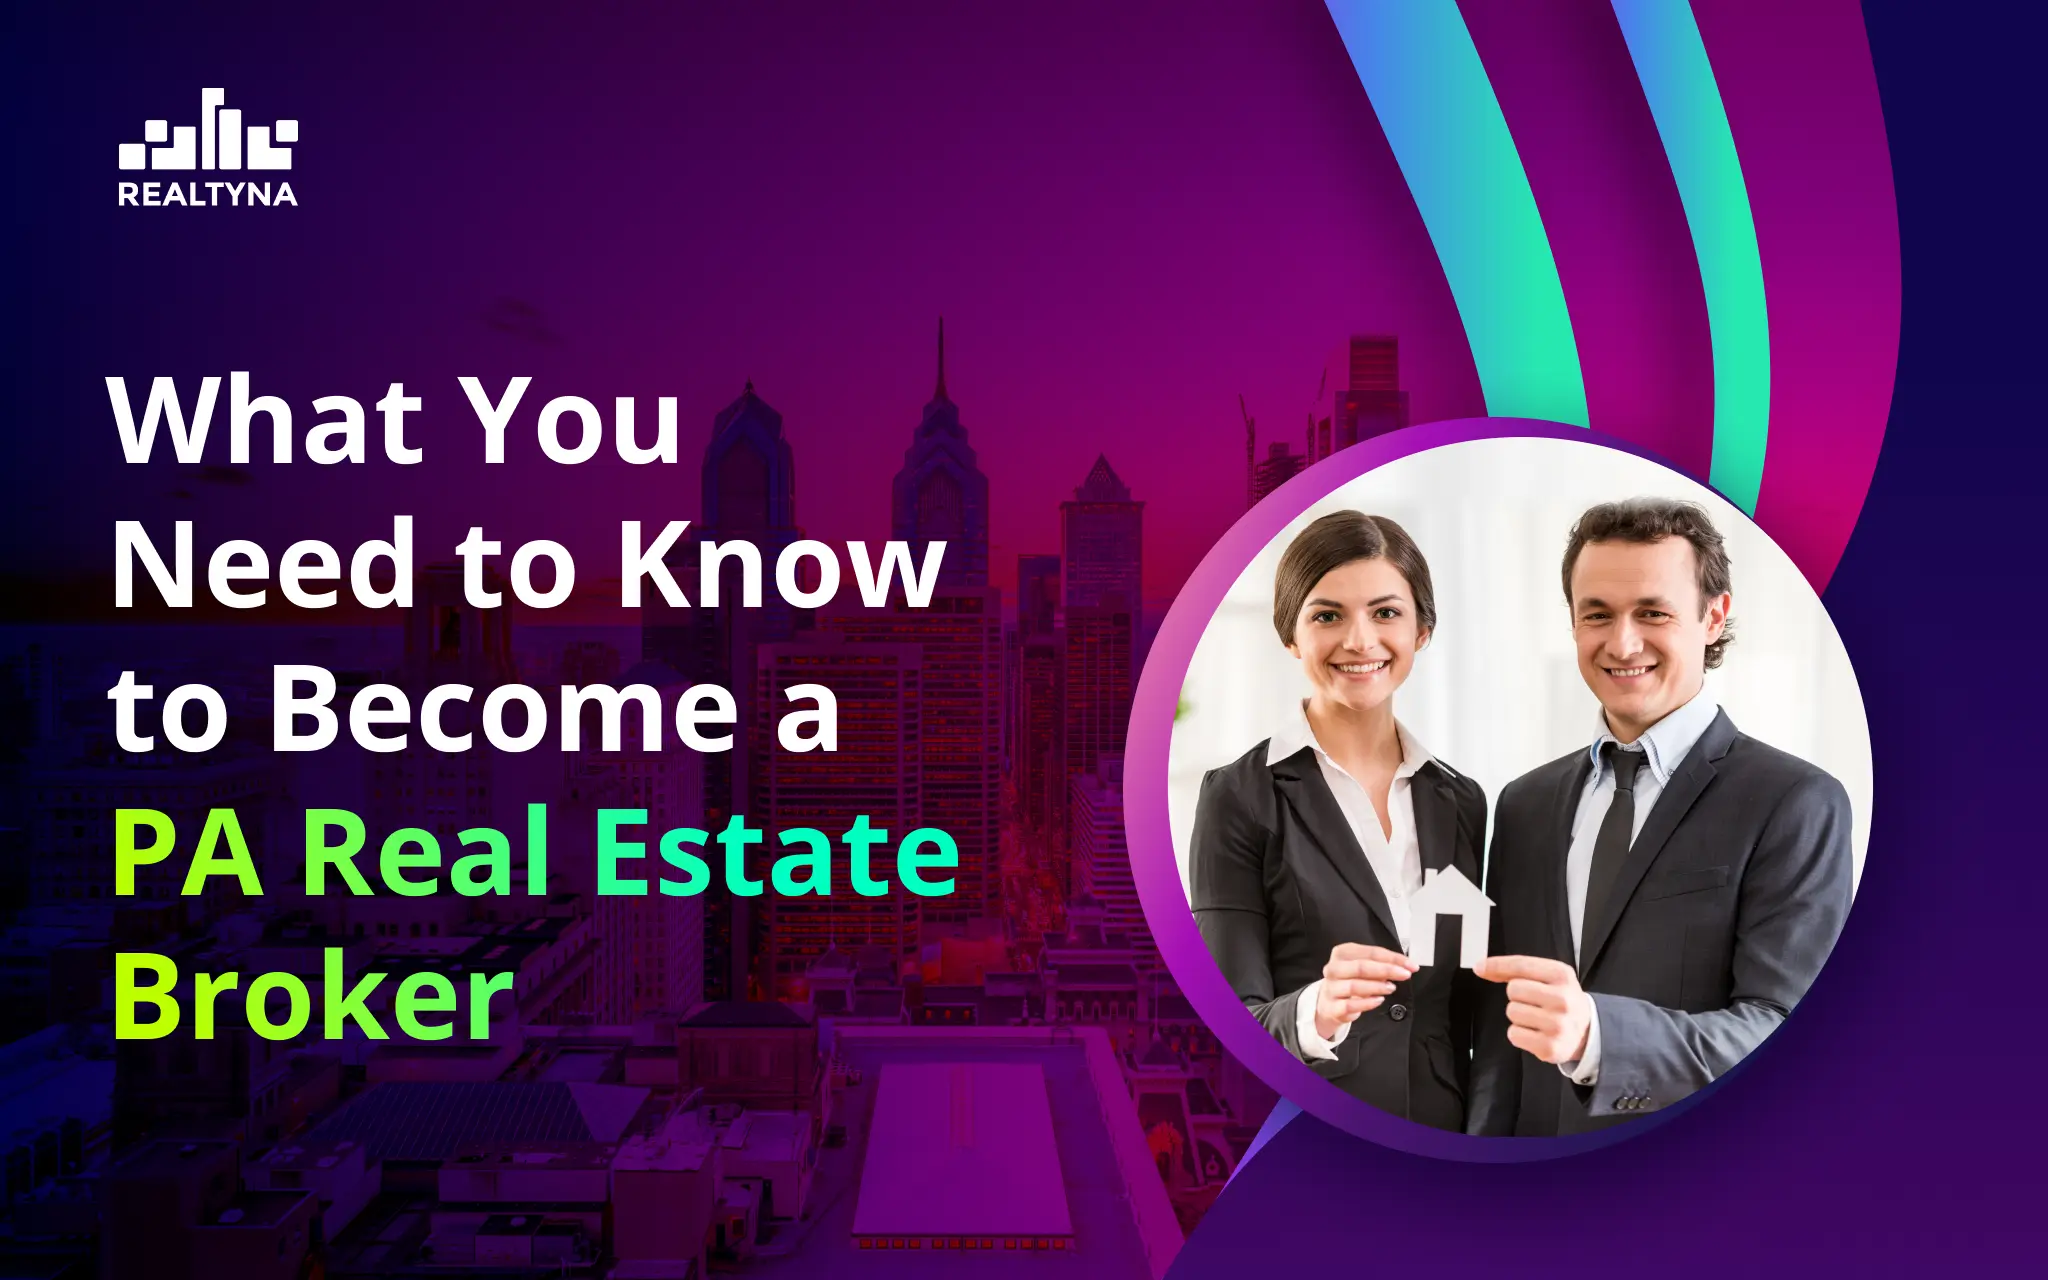 What You Need to Know to Become a PA Real Estate Broker